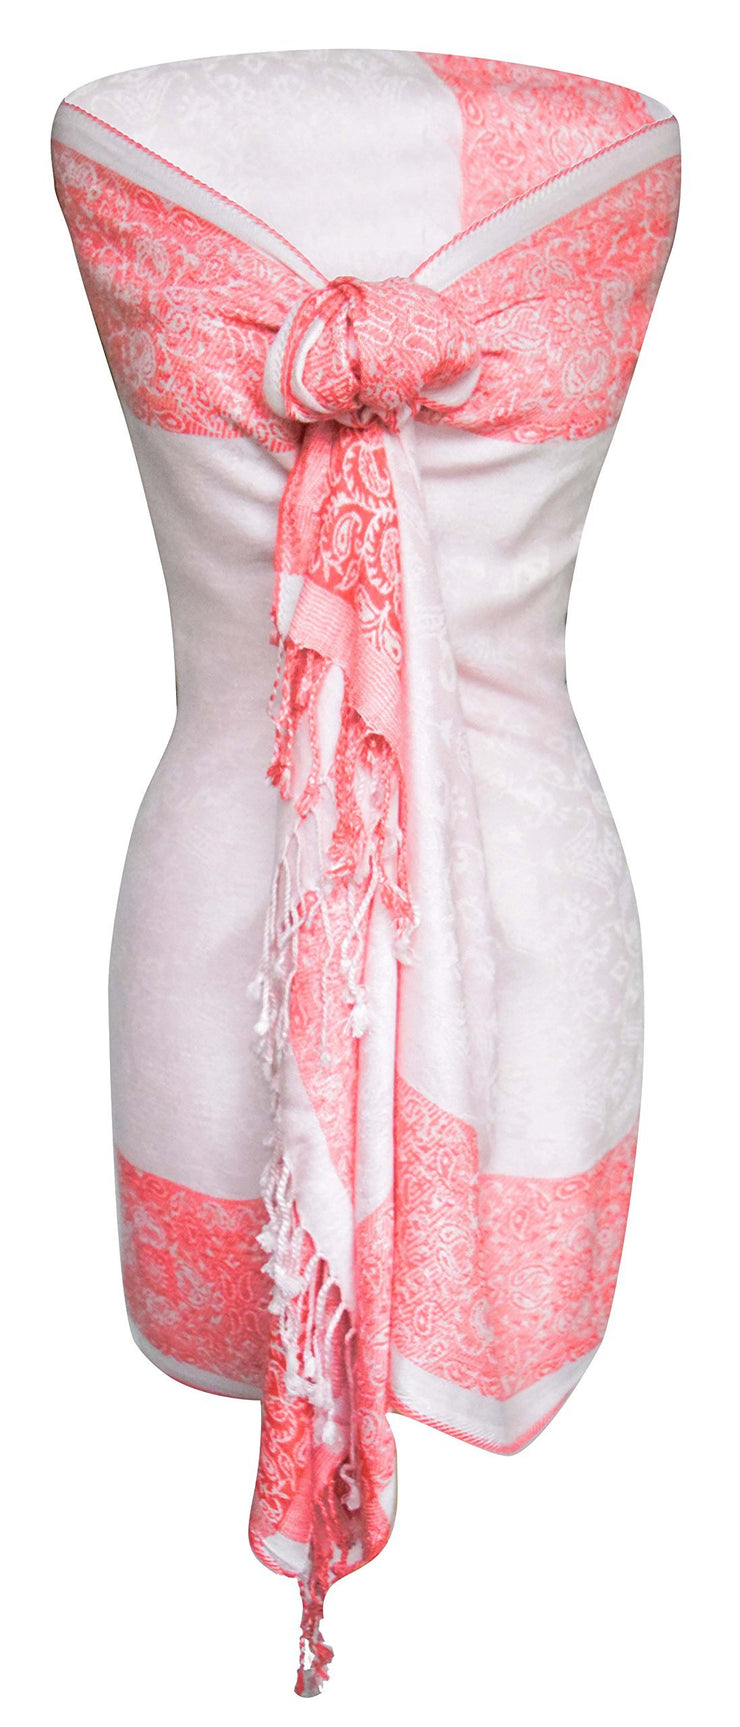 Pink and Red Peach Couture Exclusive Paisley Floral Border Reversible Pashmina Wrap Shawl